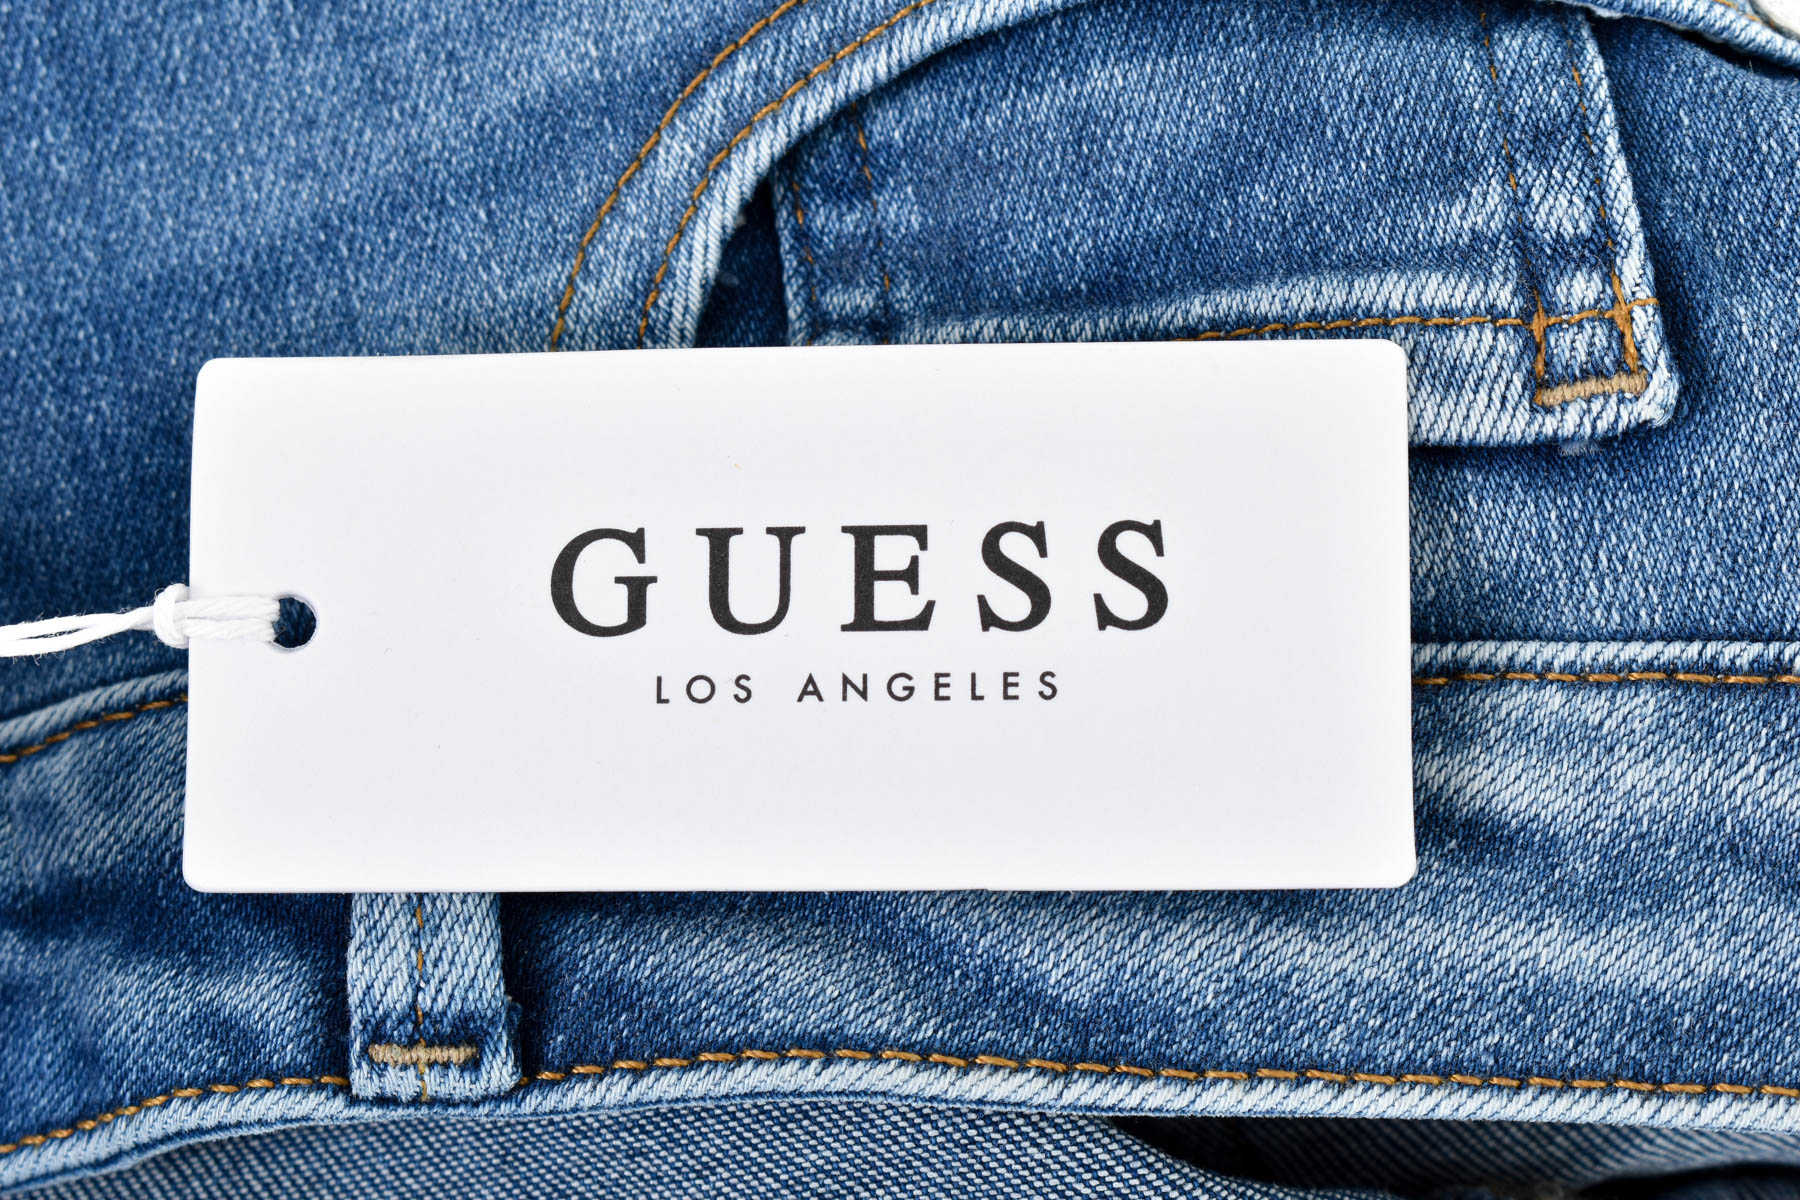 Women's jeans - GUESS - 2